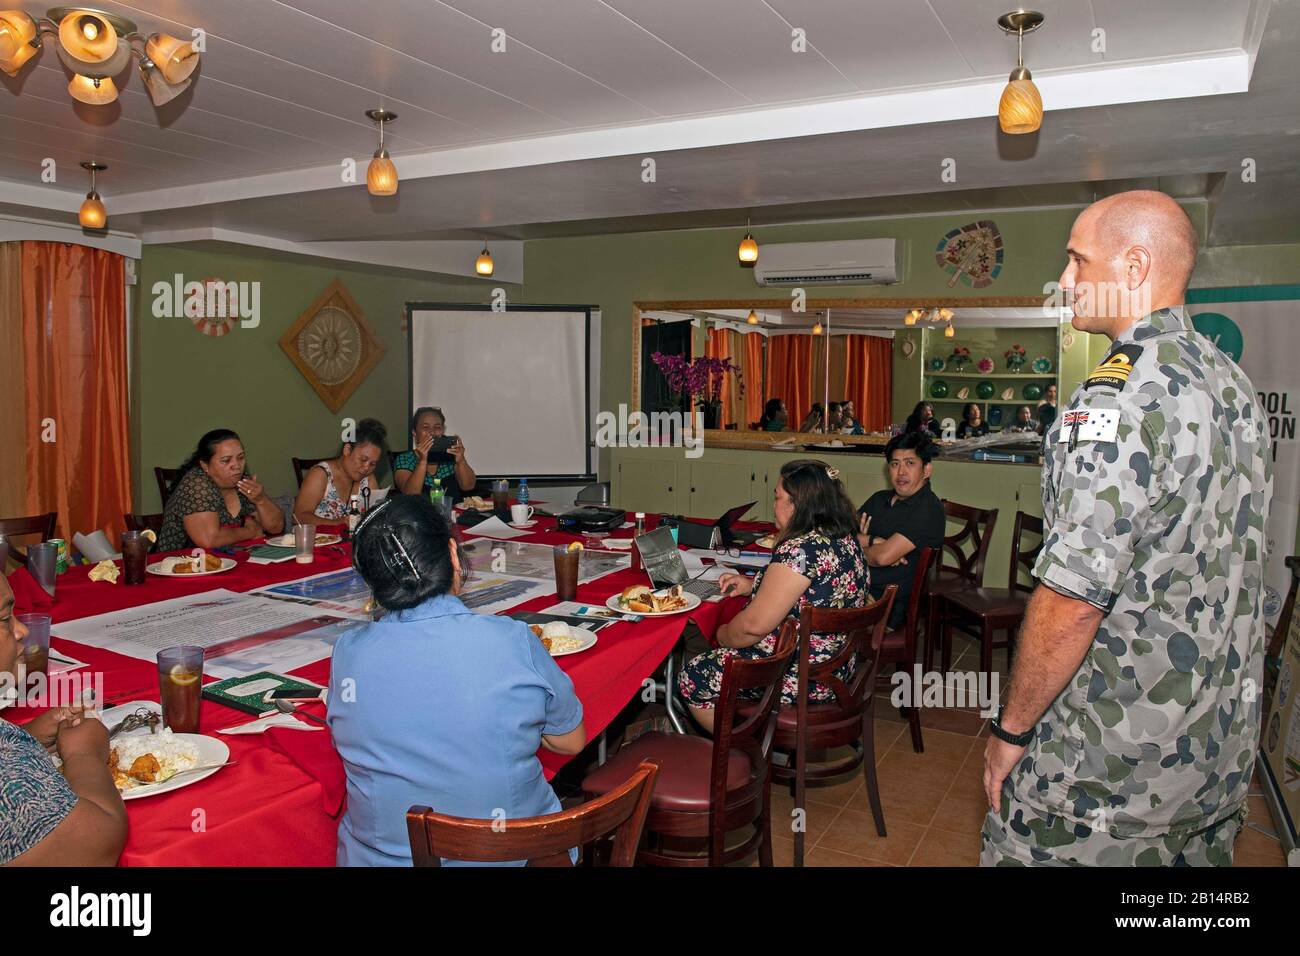 Royal Australian Navy Lt. Cmdr. David Chapman discusses United Nations’ Women, Peace and Security Agenda during a luncheon with local Marshallese officials at the Marshall Islands Resort during Pacific Partnership 2019 in the Republic of the Marshall Islands, March 19, 2019. Pacific Partnership, now in its 14th iteration, is the largest annual multinational humanitarian assistance and disaster relief preparedness mission conducted in the Indo-Pacific. Each year, the mission team works collectively with host and partner nations to enhance regional interoperability and disaster response capabili Stock Photo